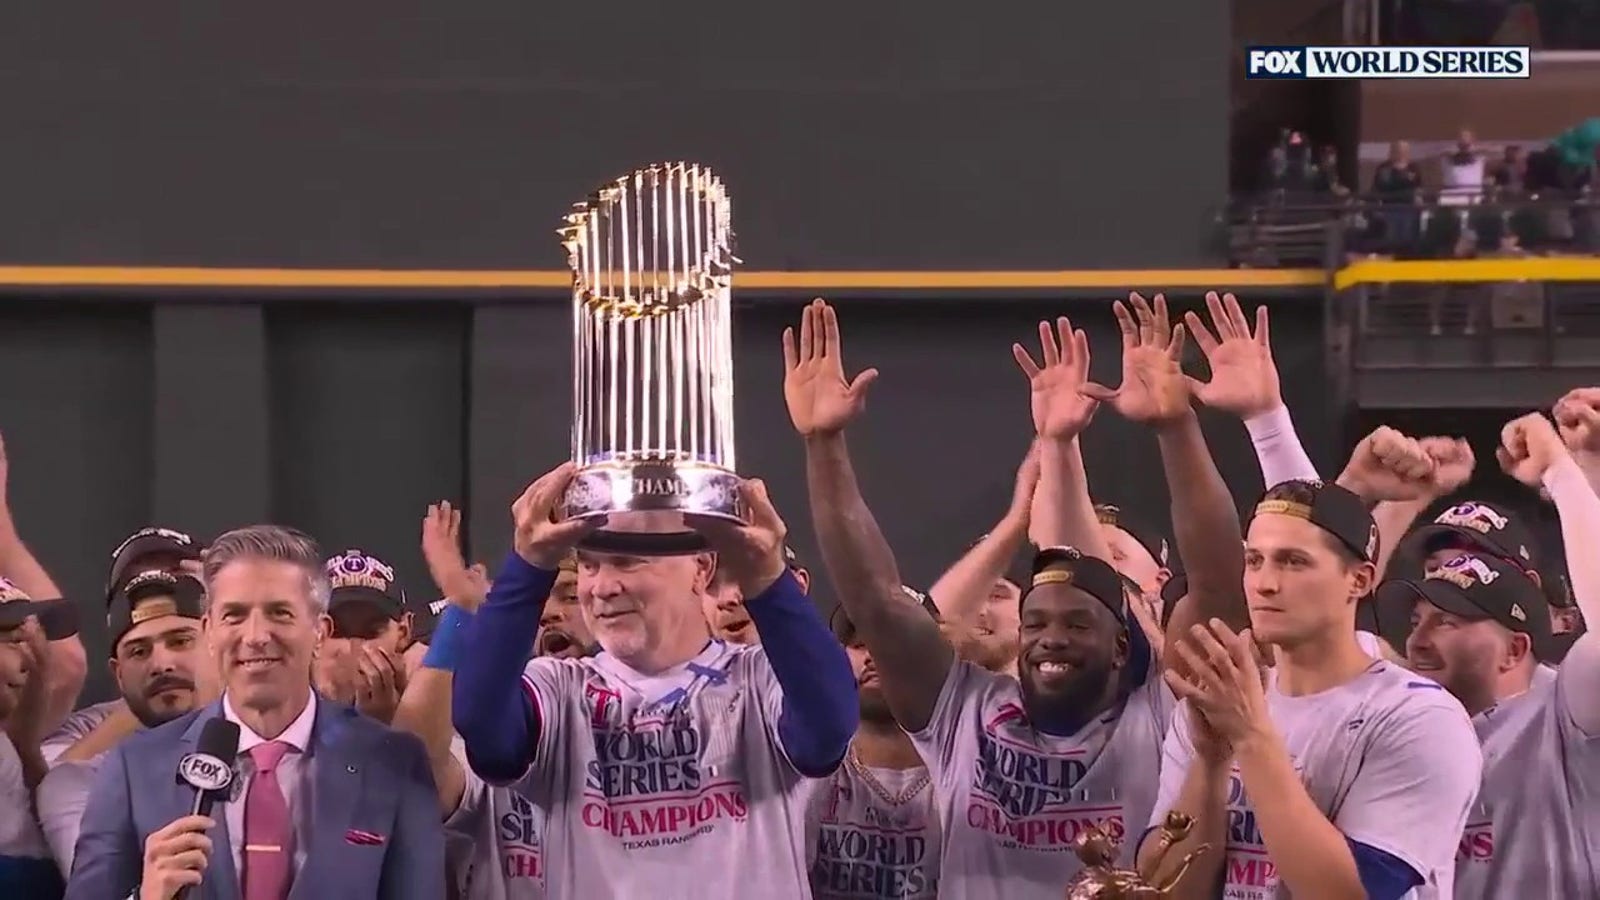 Manager Bruce Bochy lifts World Series trophy after Rangers win first title